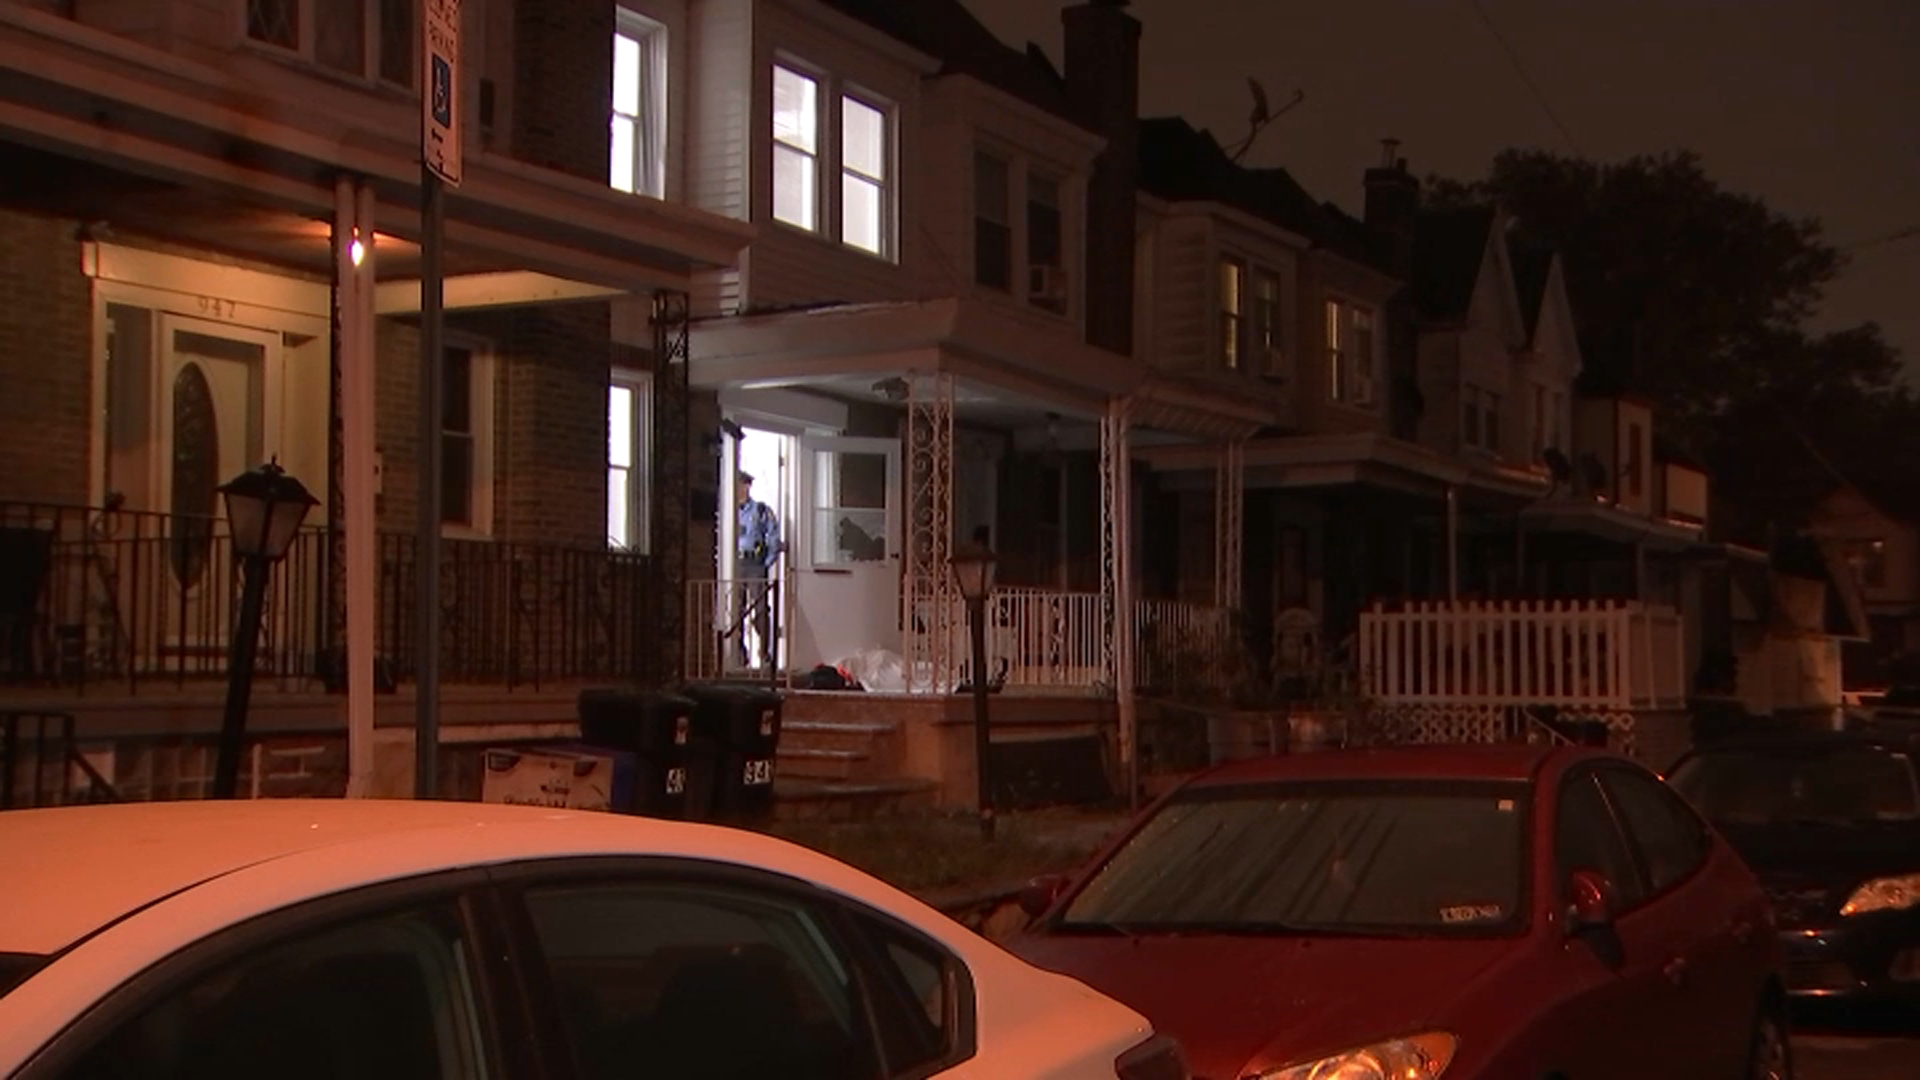 Man Killed Outside Philly Home in Ambush Shooting: Police